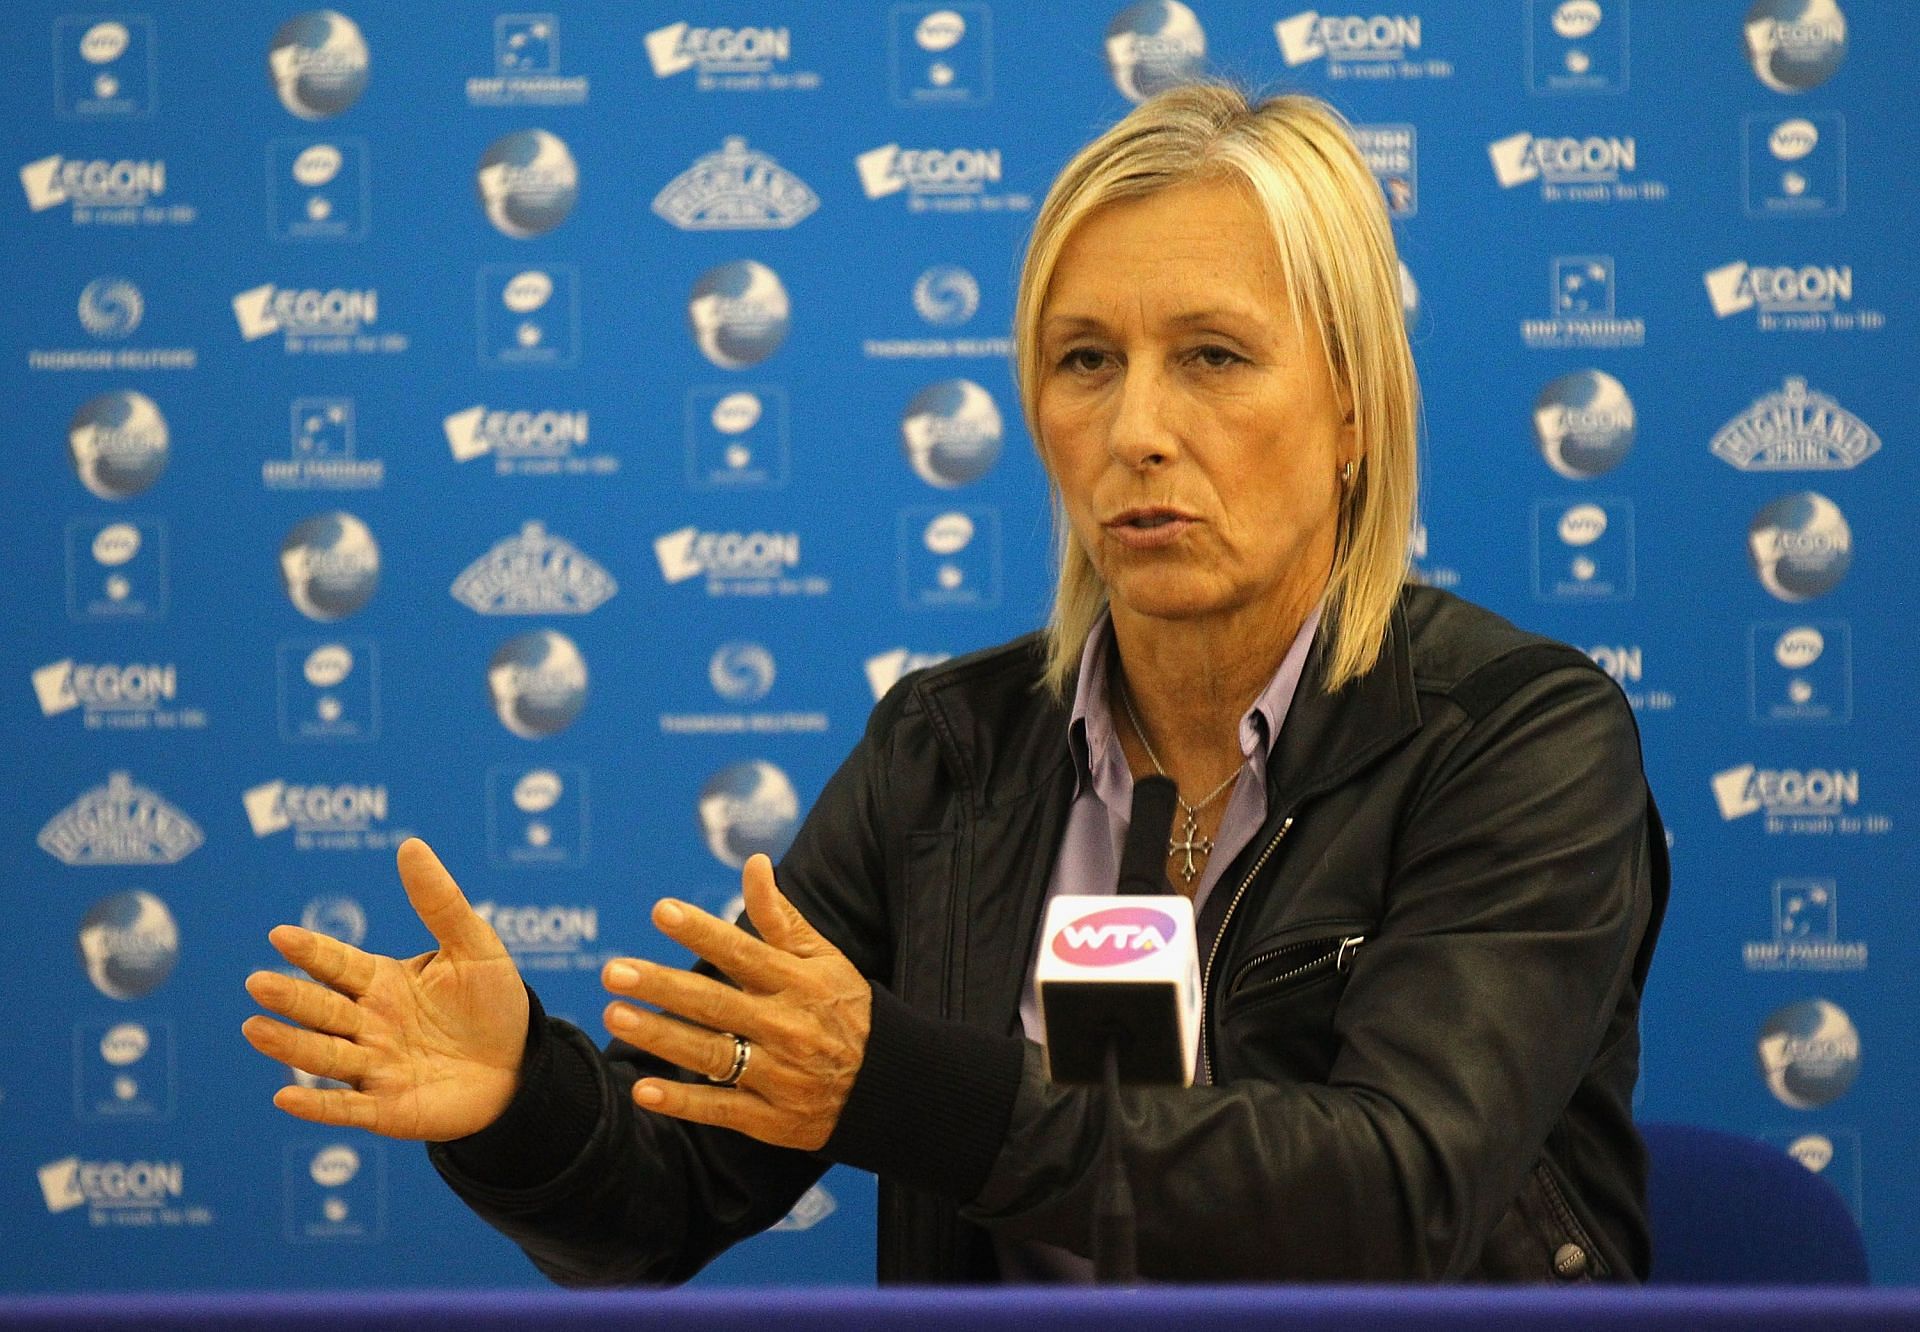 Martina Navratilova is known for raising serious issues in the public domain